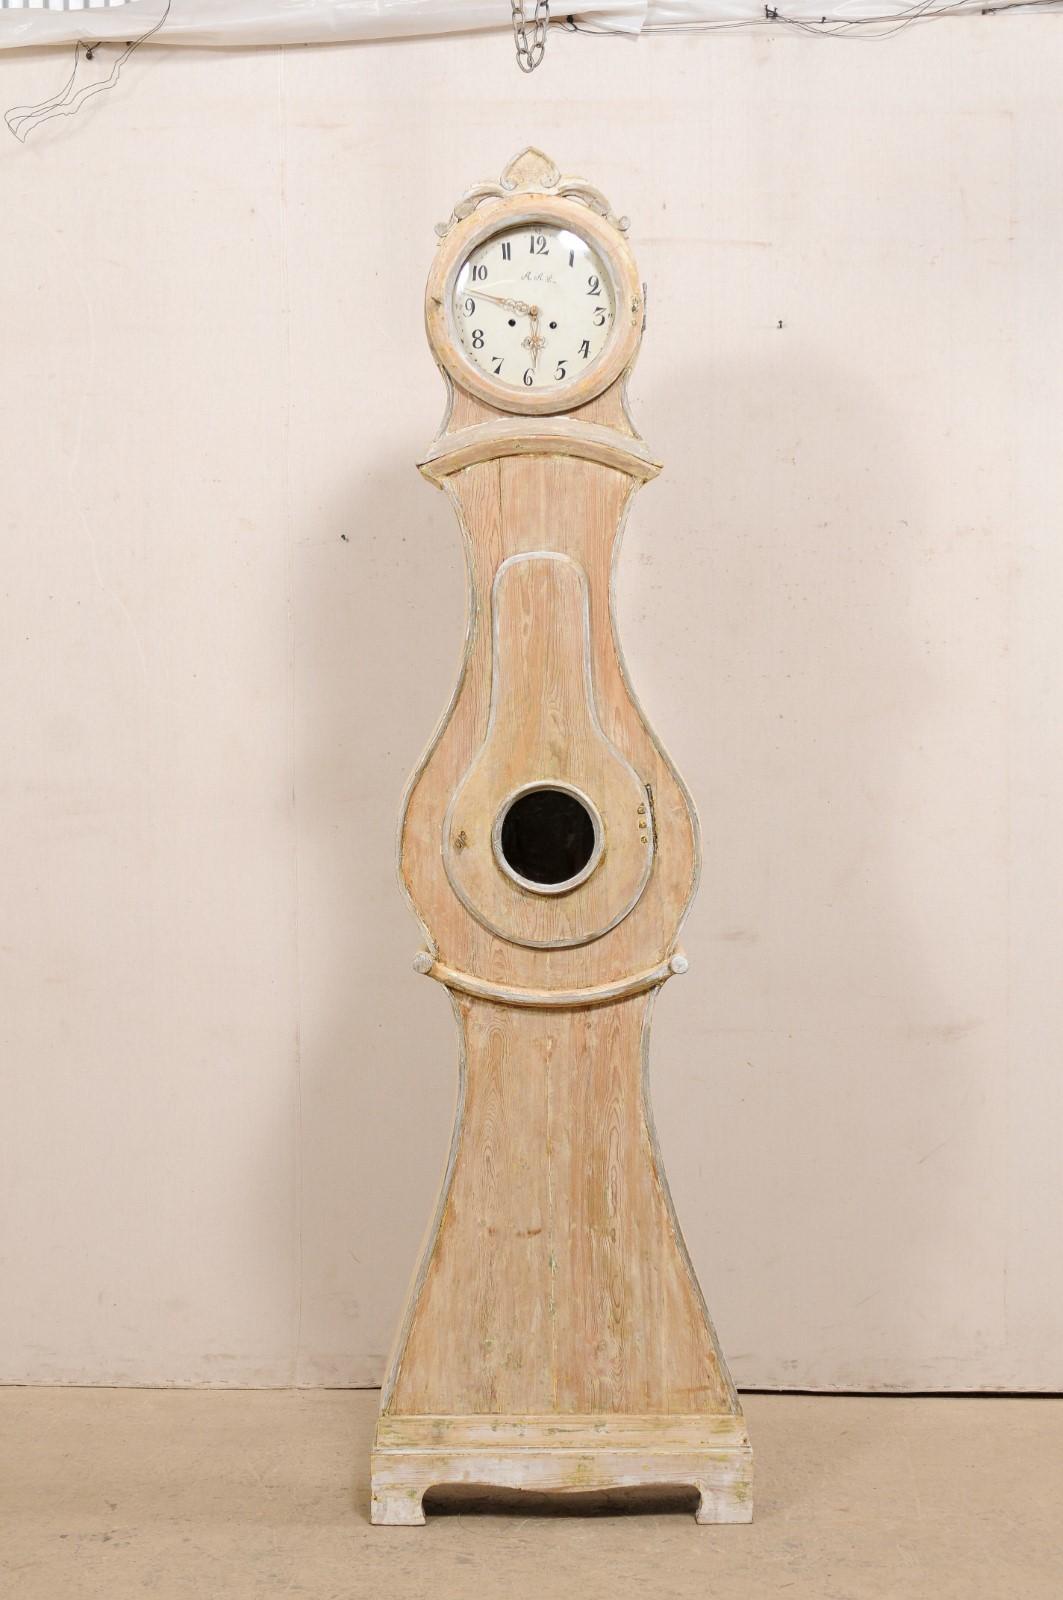 A Swedish wood carved Mora floor clock from the 19th century. This antique Mora clock from Sweden is a very nice clock; it is taller than the typical Mora clock and features details more closely associated with a Fryksdahl clock. This grandfather